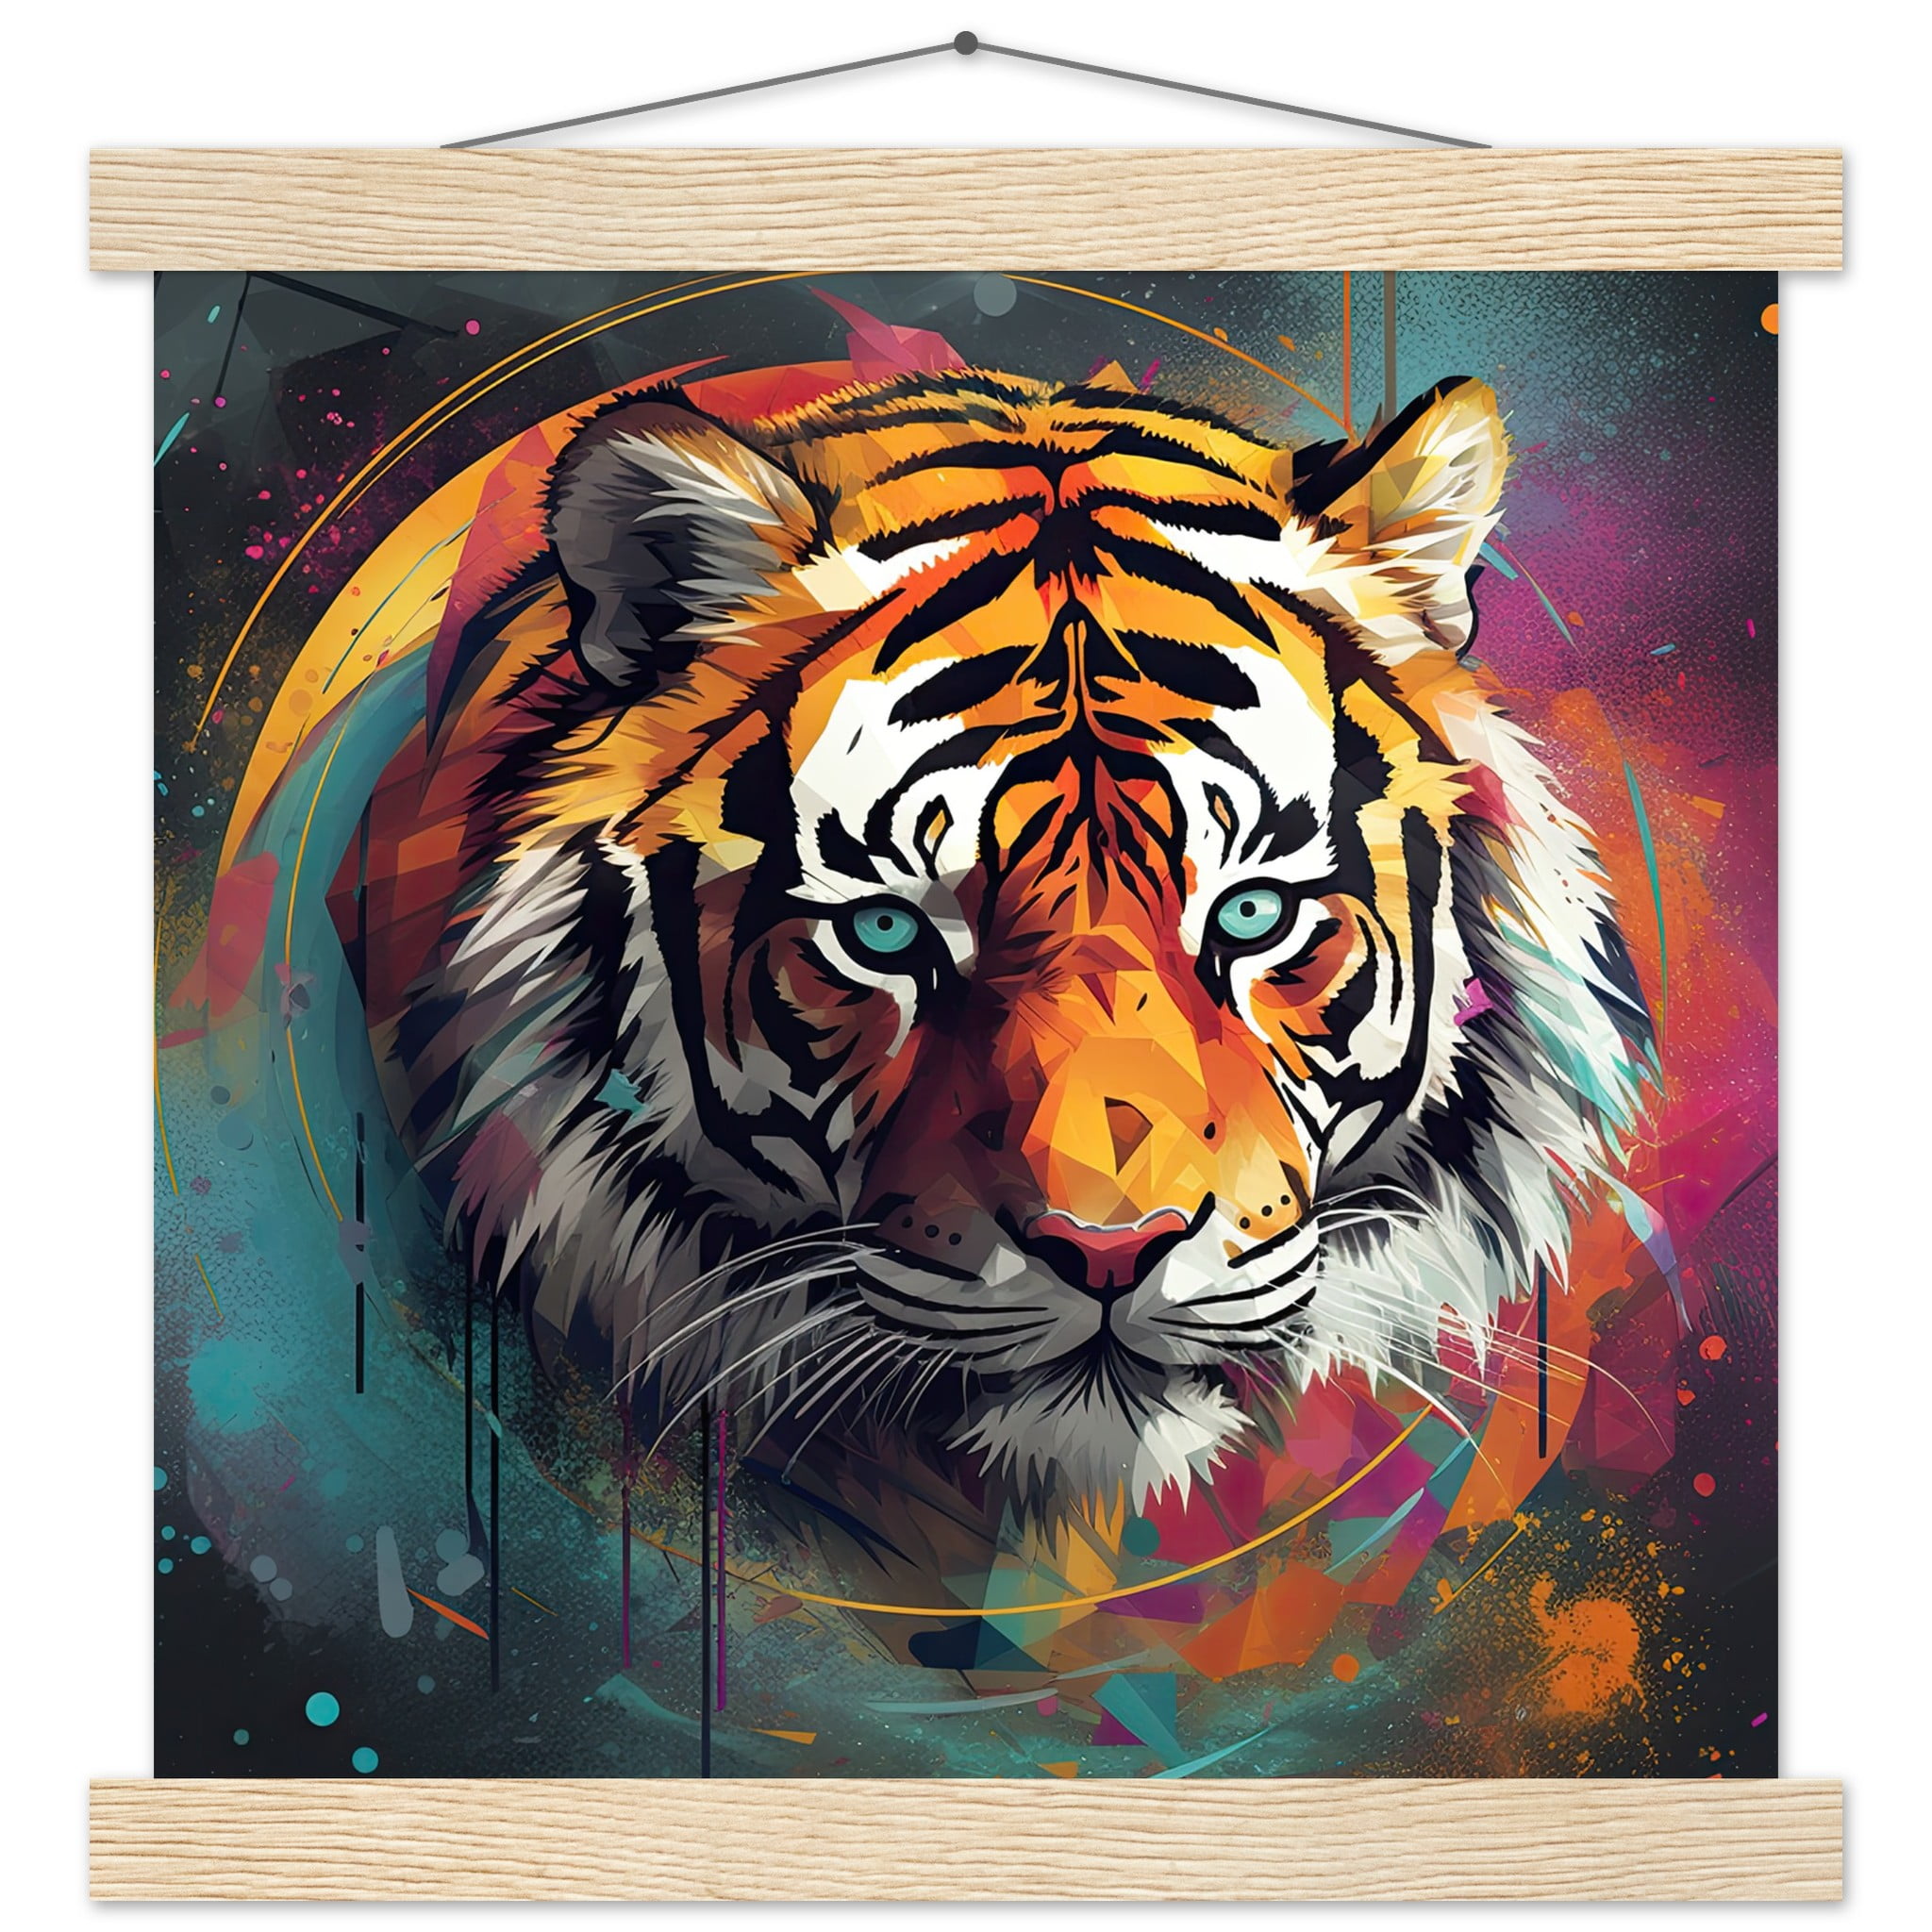 Tiger Colorful Abstract Art Print with Hanger – 30×30 cm / 12×12″, Natural wood wall hanger